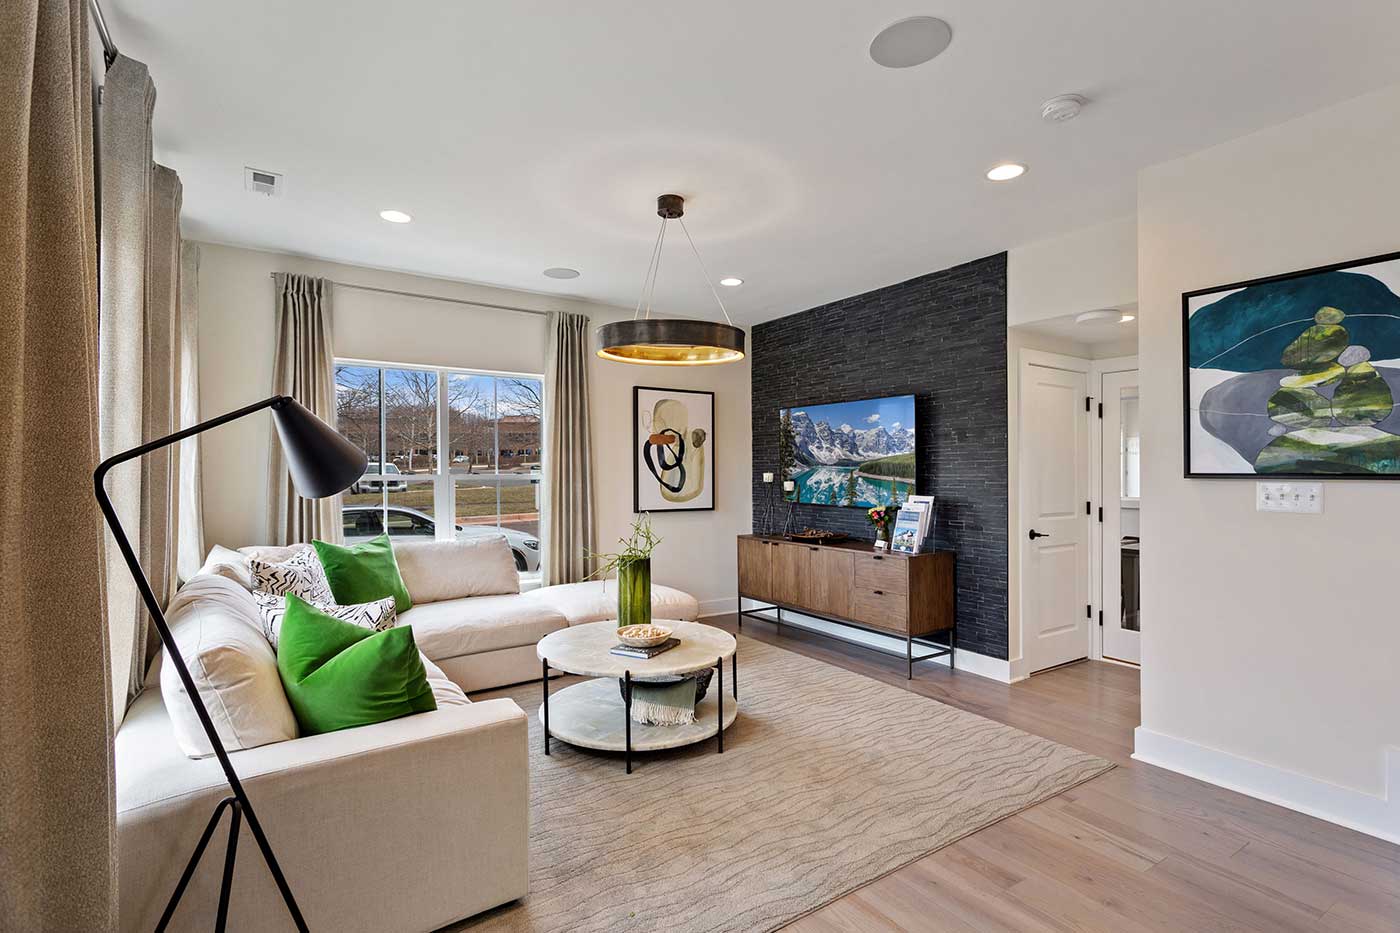 Living Spaces Gallery, New Homes in Maryland, Virginia, Washington D.C.